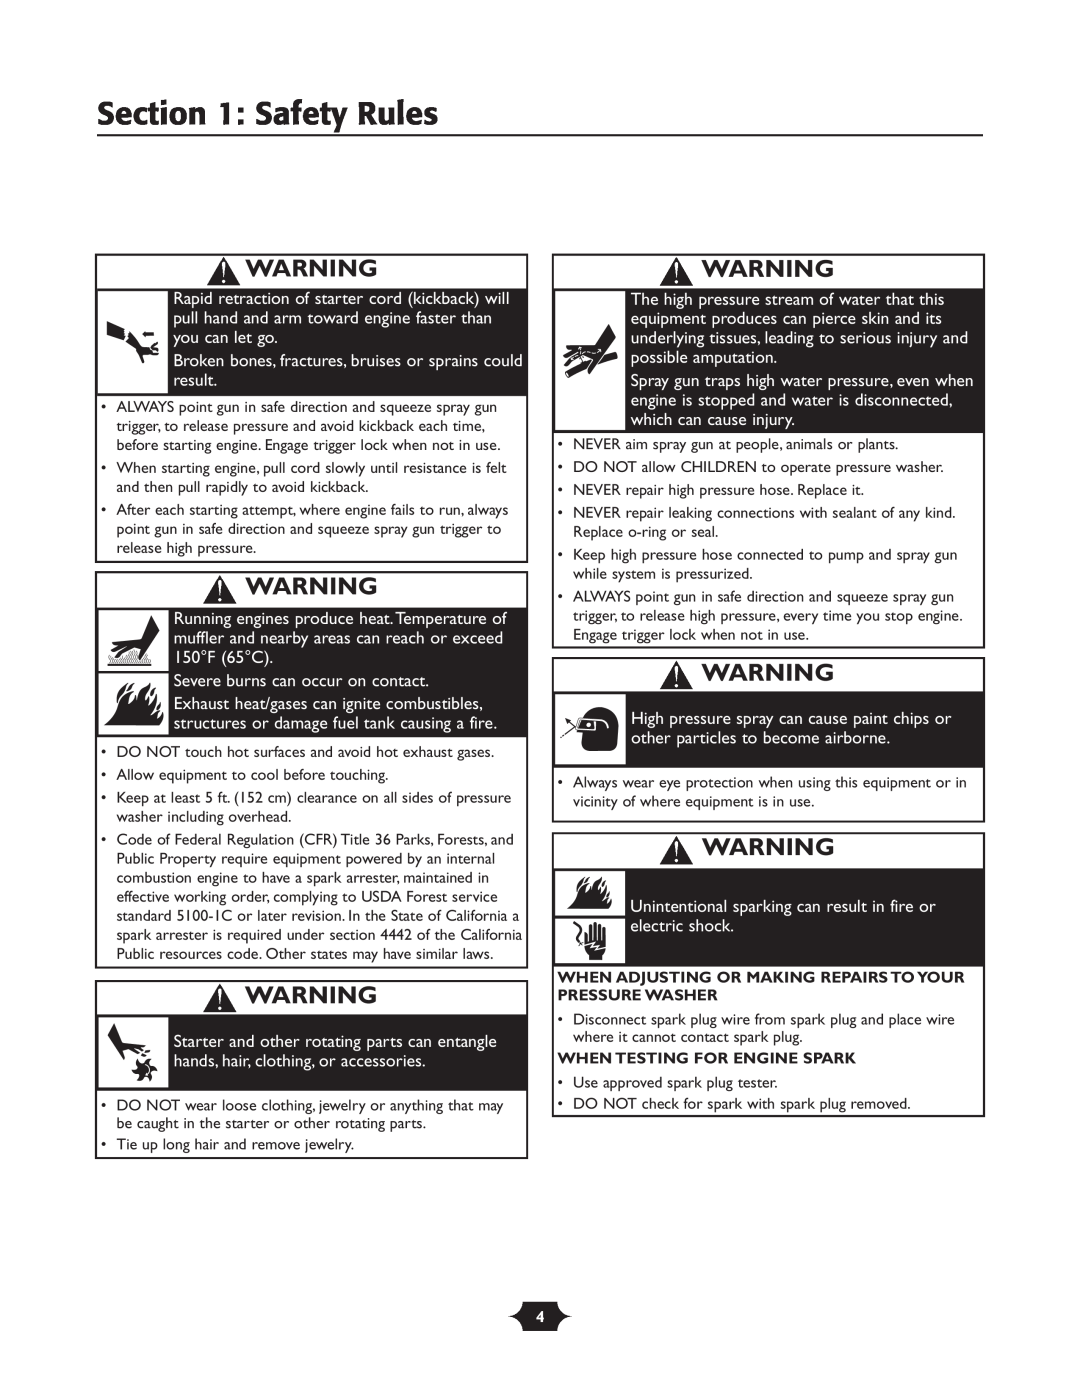 Troy-Bilt 020242-4 manual Safety Rules, Severe burns can occur on contact 